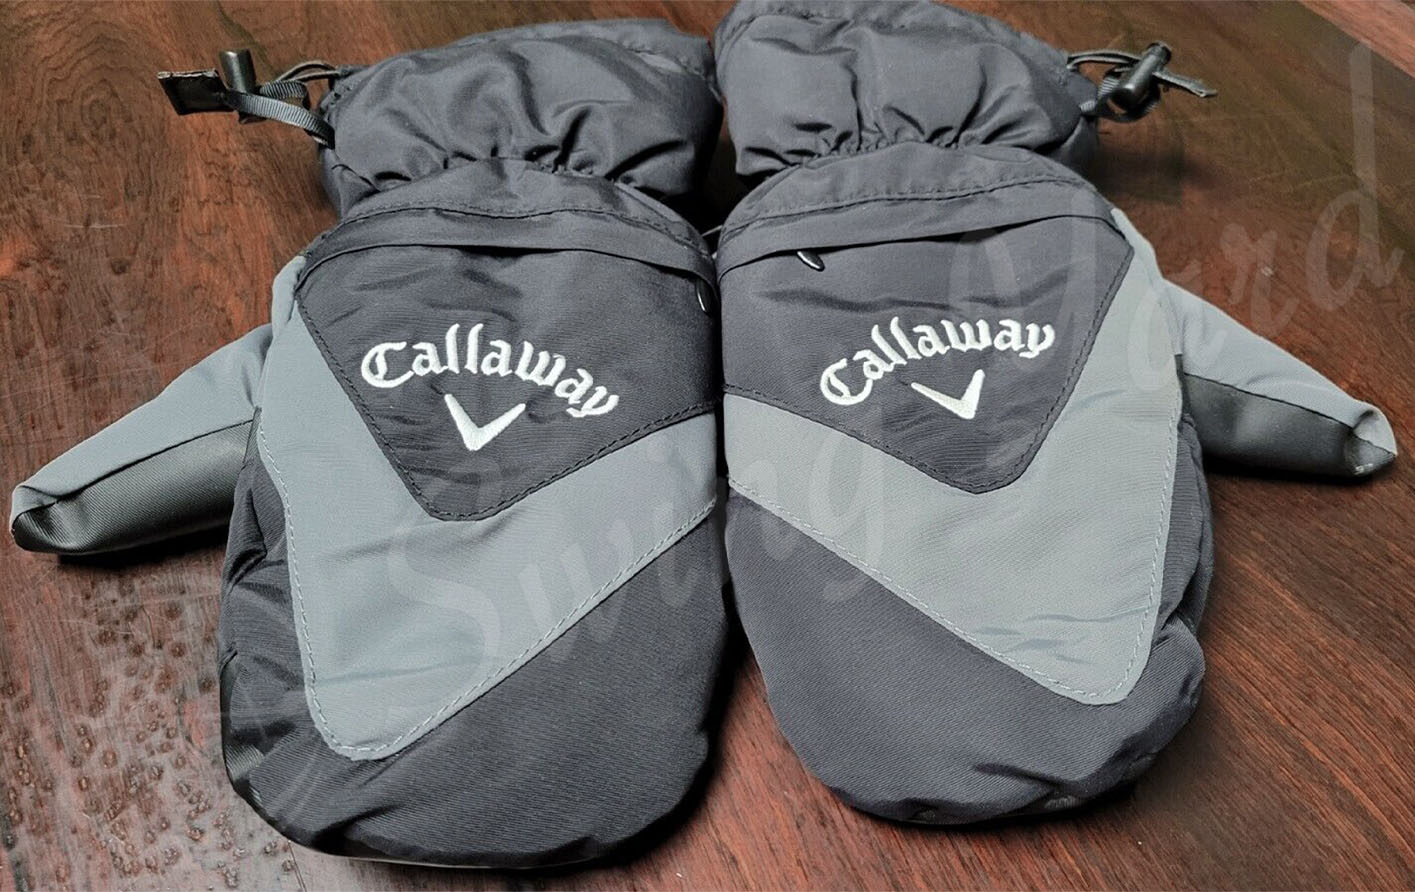 My new Callaway Thermal Mitts in the living room